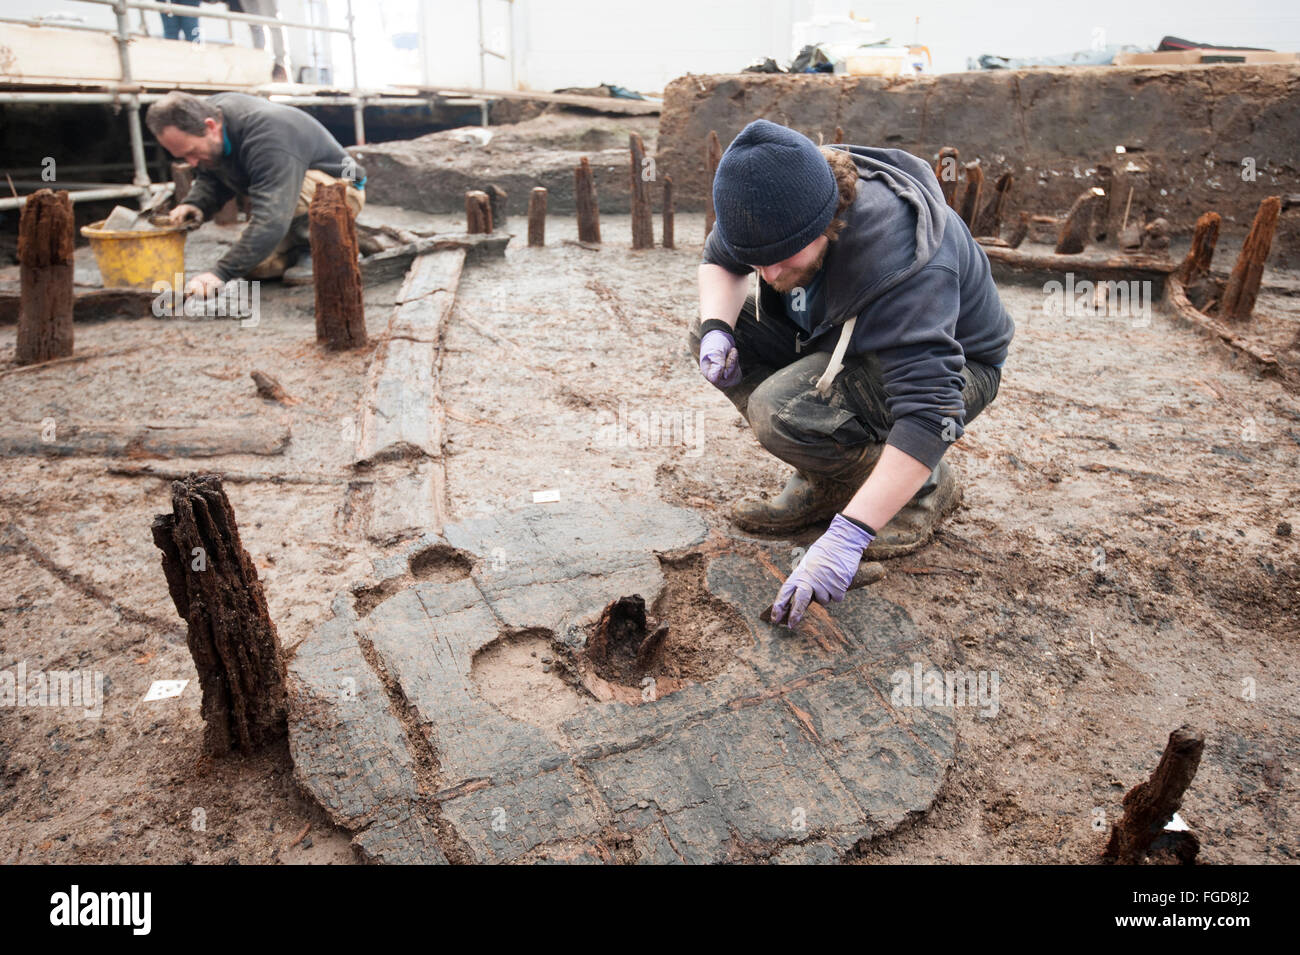 Archaeologists have uncovered a 3000 year old Bronze Age wheel at Must farm site in Cambridgeshire, U.K. Stock Photo